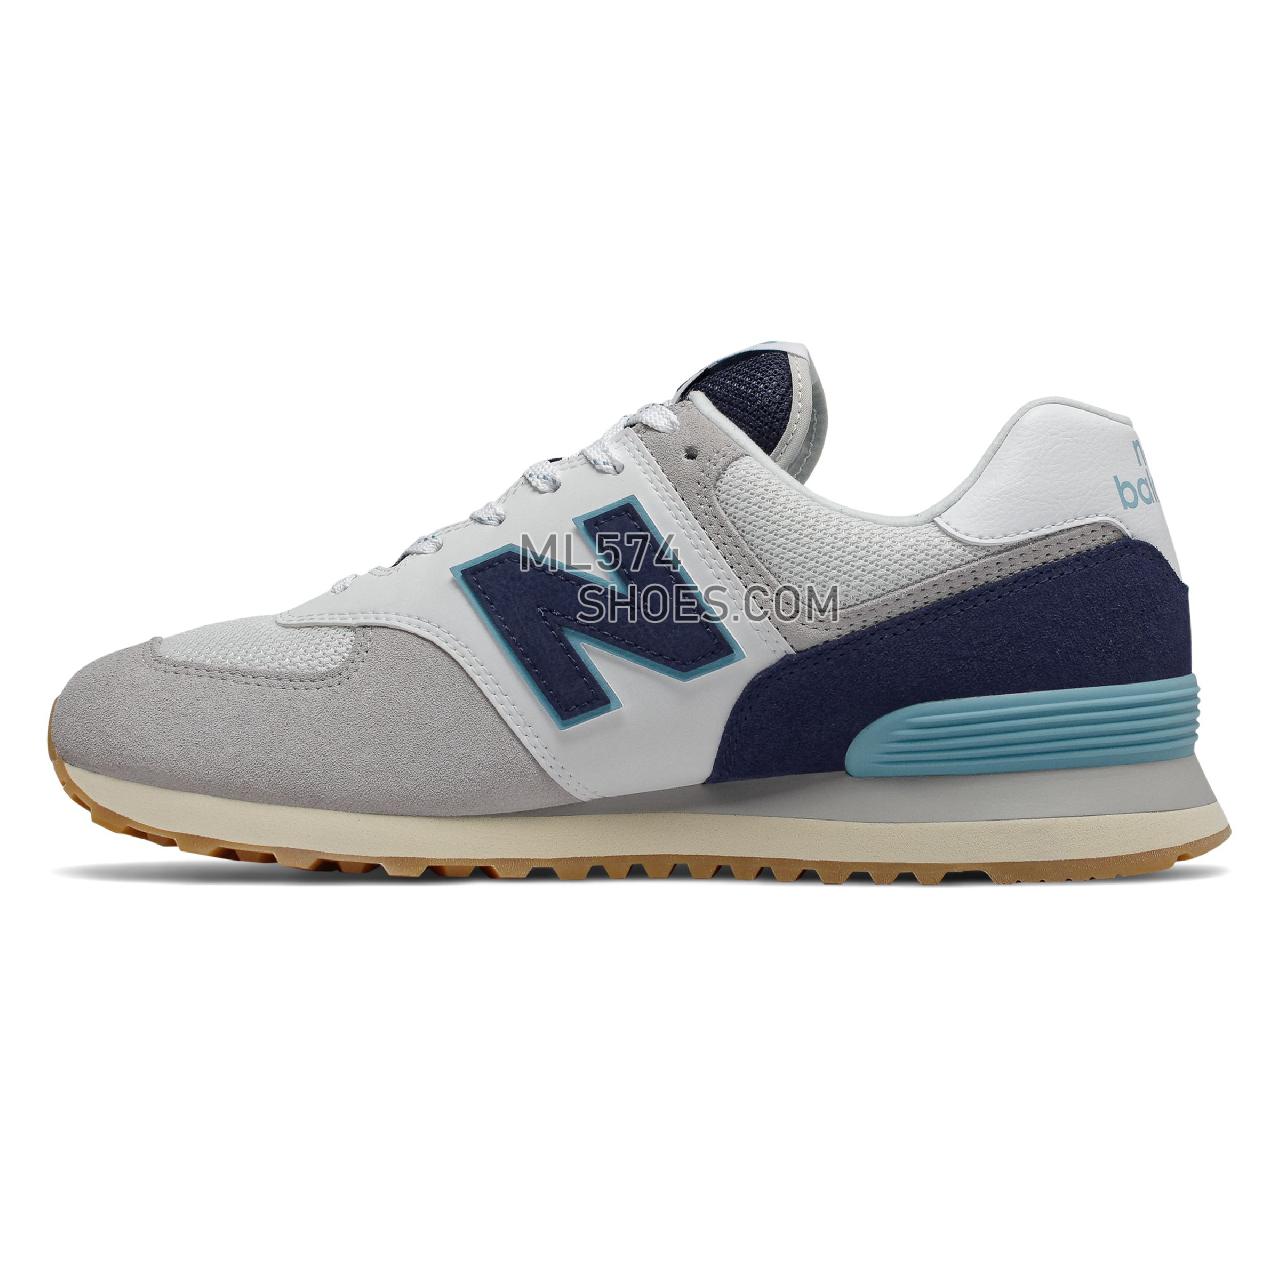 New Balance 574 - Men's Classic Sneakers - Rain Cloud with Pigment and Bali Blue - ML574SOU